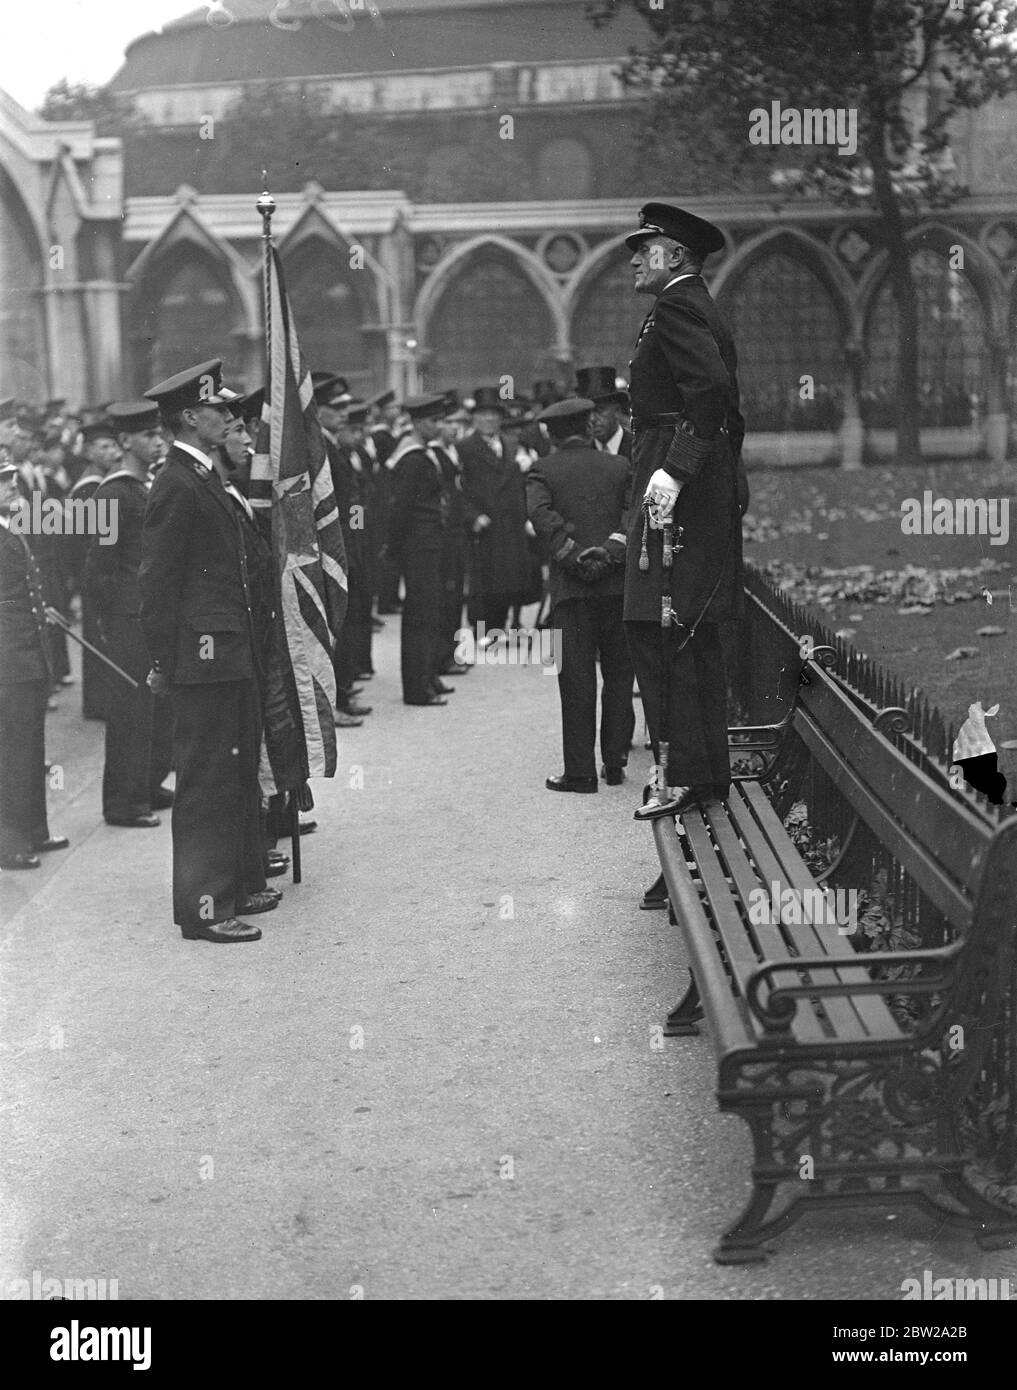 Adml uses garden seat to address naval cadets. Using a convenient garden seat beside the Law Courts, Adml Sir Martin Dunbar Nasmith, VC, addressed naval cadets after they had attended their annual service at St Clement Danes Church in the Strand, London.. Photo shows, Adml Sir Martin Dunbar Nasmith, VC, addressing the cadets from the seat beside the Law Courts. 24 October 1937 Stock Photo